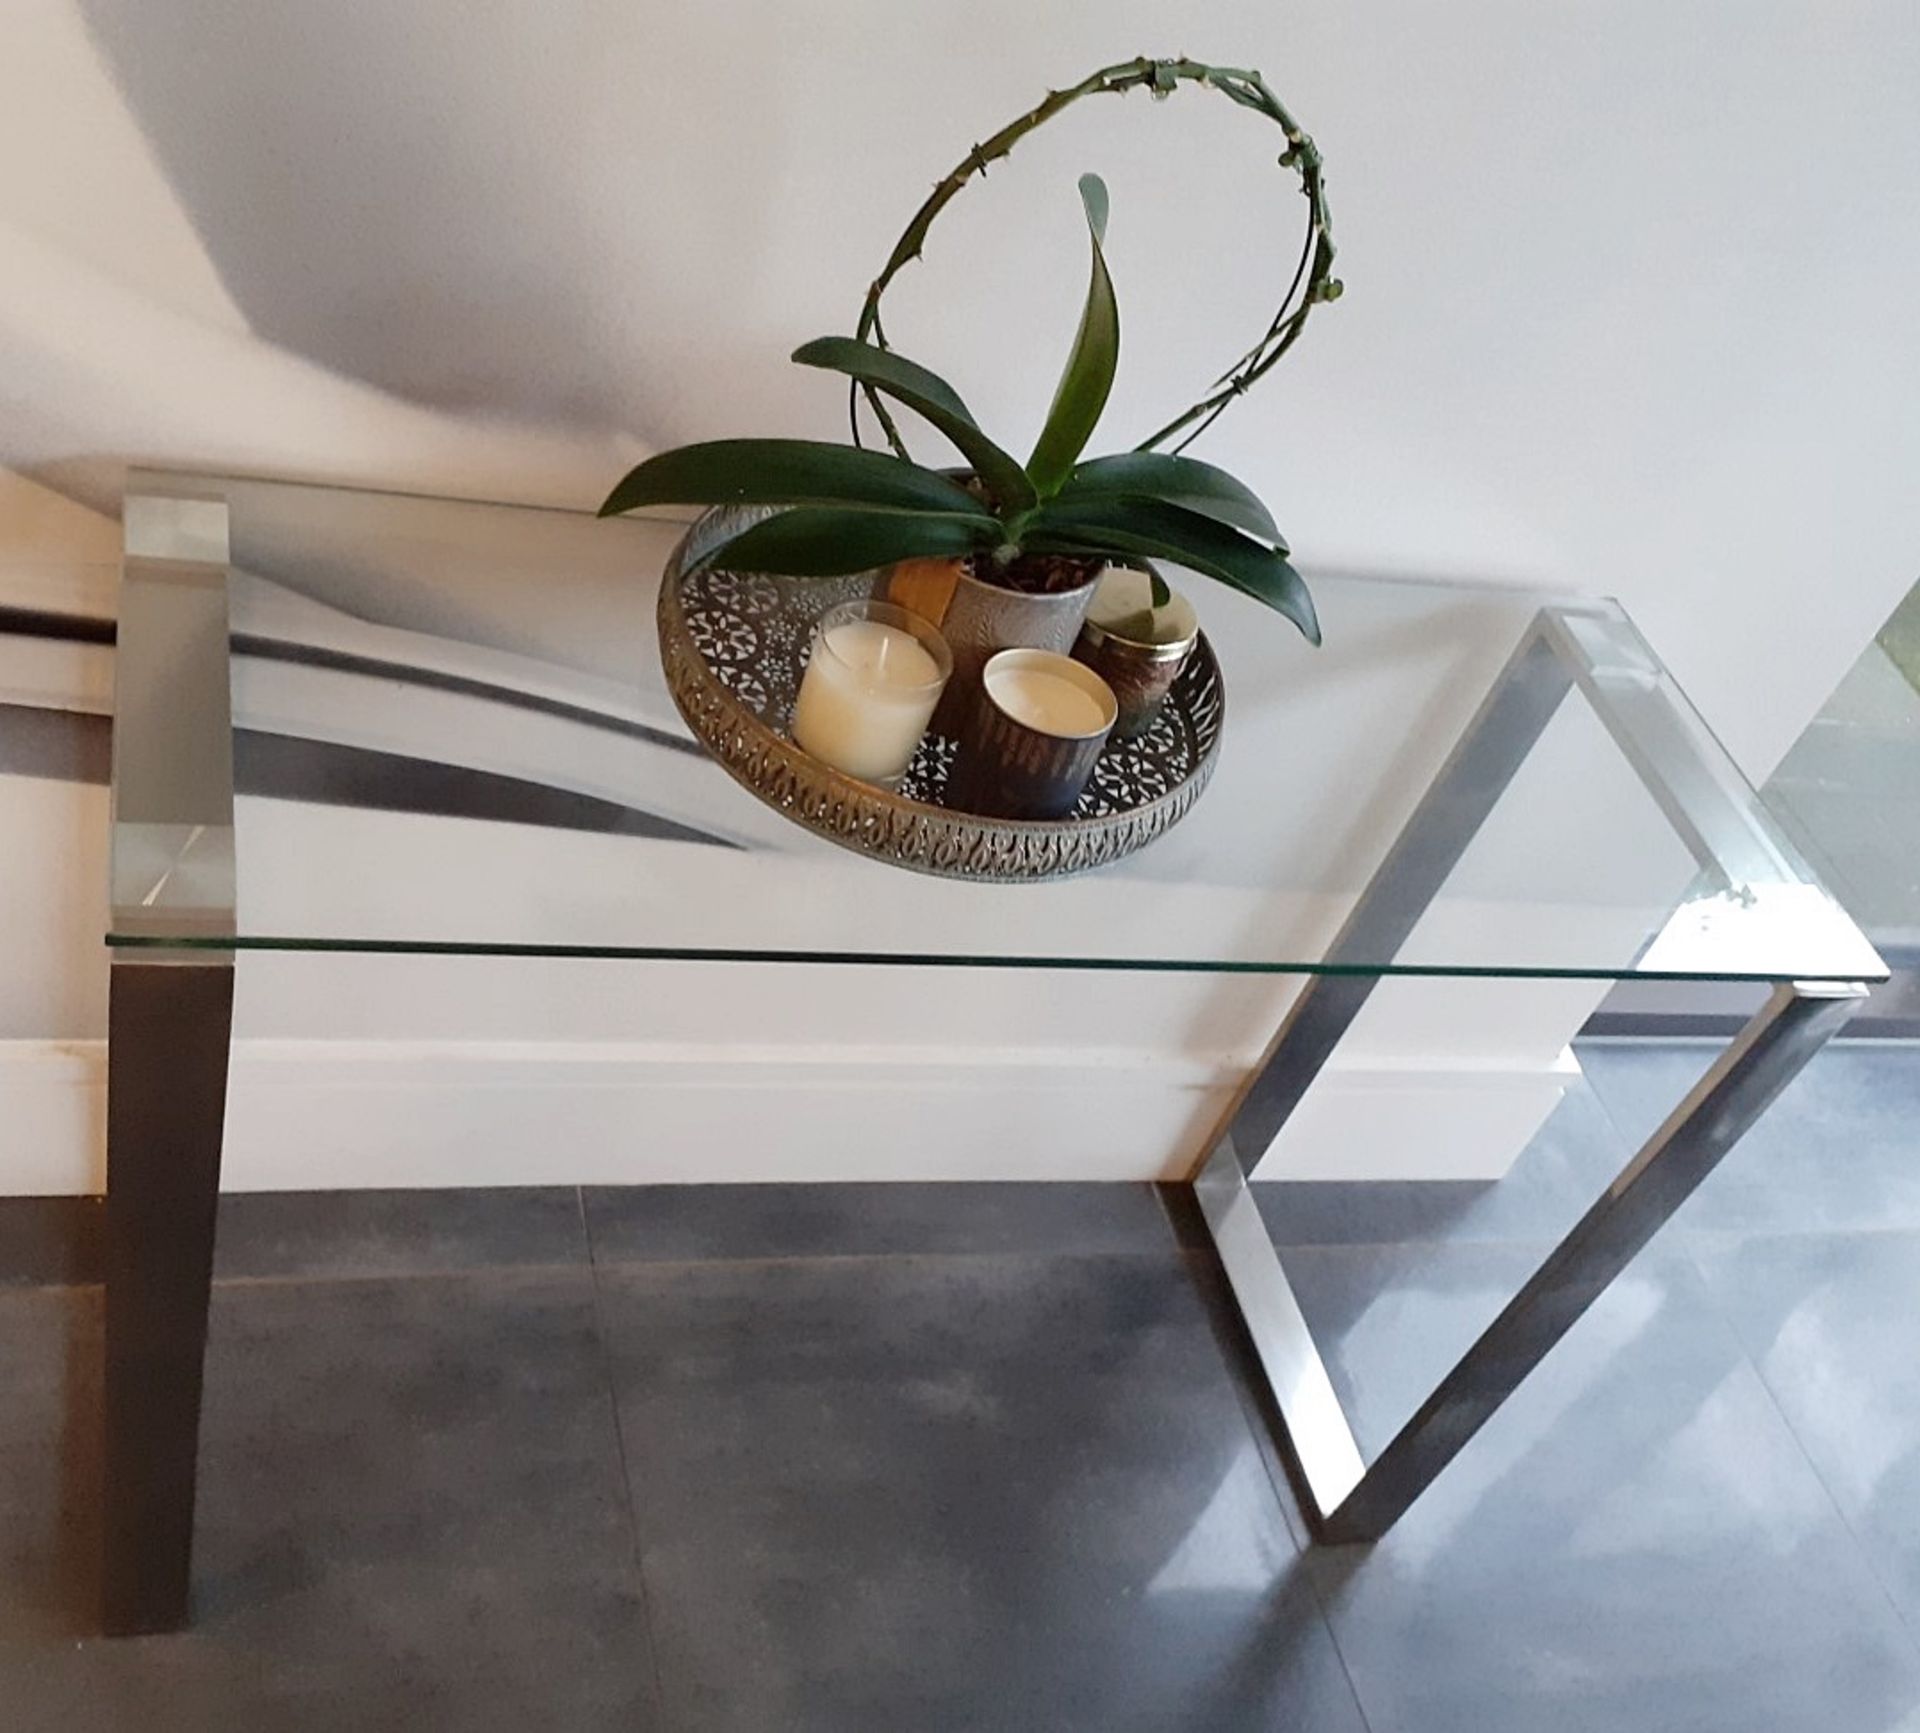 1 x Glass Topped Console Table With A Sturdy Metal Frame - Dimensions: 110 x 40 x H74cm - Image 2 of 3